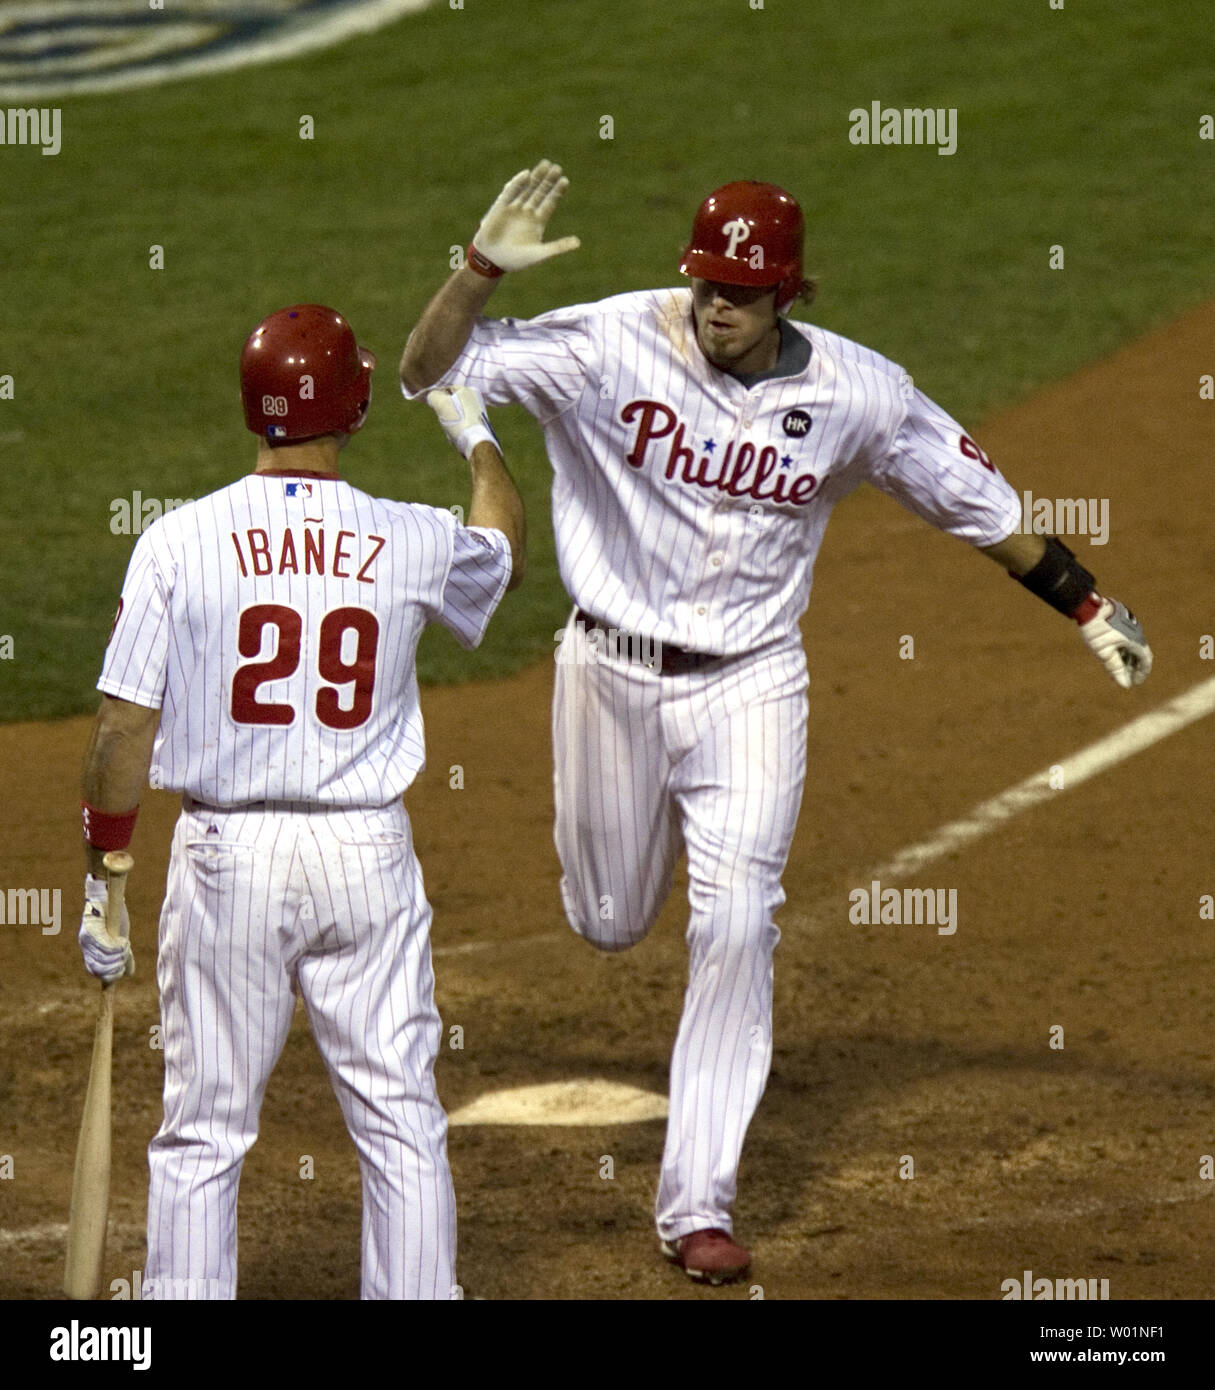 Philadelphia Phillies Jayson Werth high fives teammate Raul Ibanez as he crosses home plate after hitting a home run in the sixth inning of game 3 of World Series in Philadelphia on October 31, 2009.      UPI/John Anderson Stock Photo